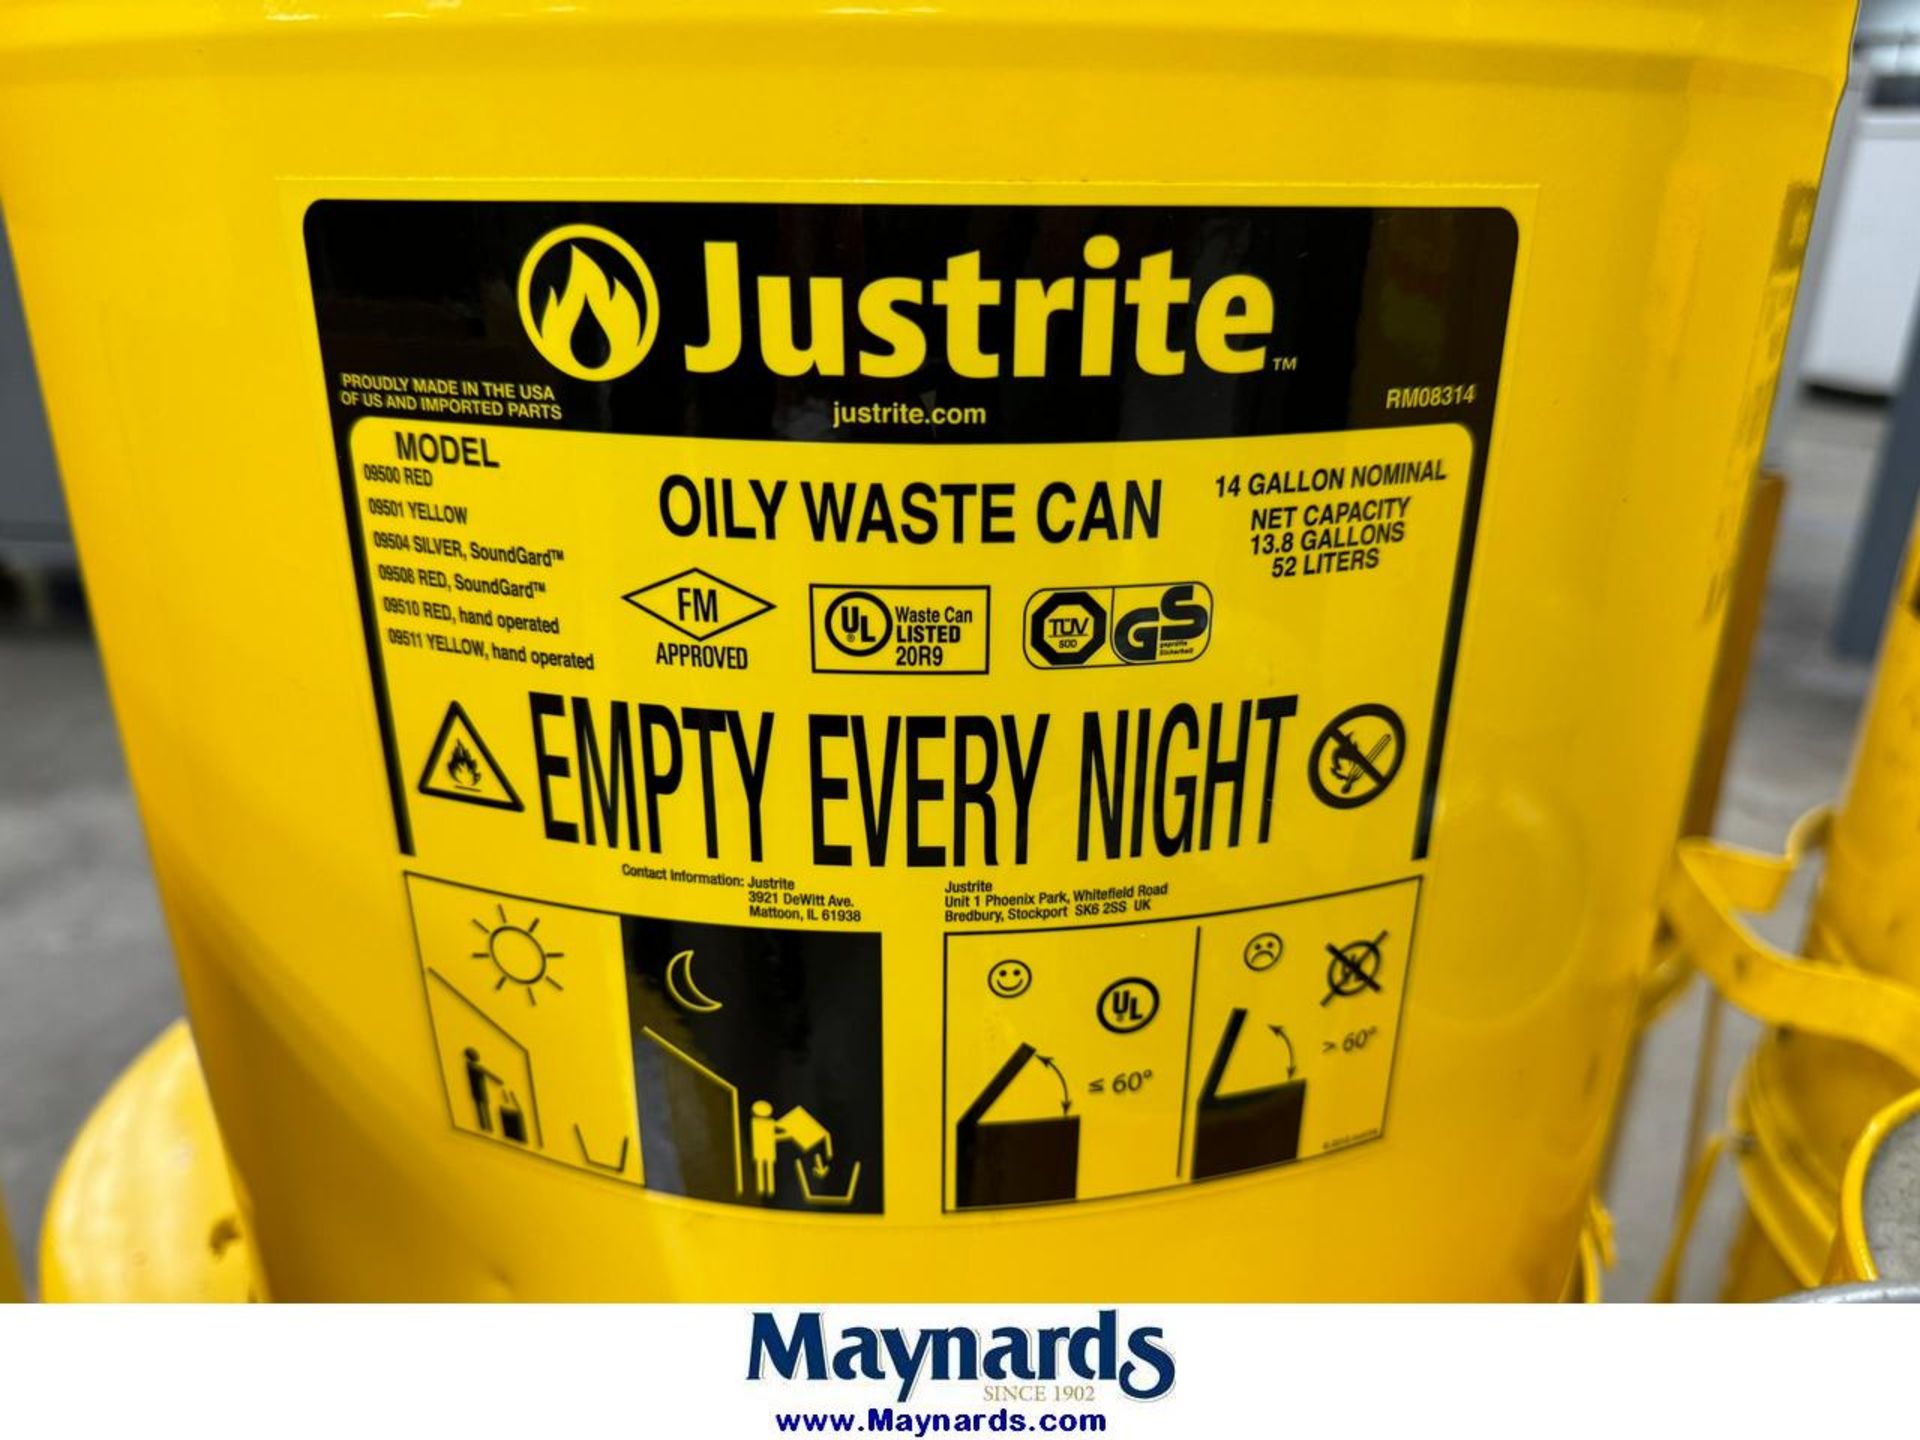 Lot of Justrite Oily Waste Cans - Image 4 of 4